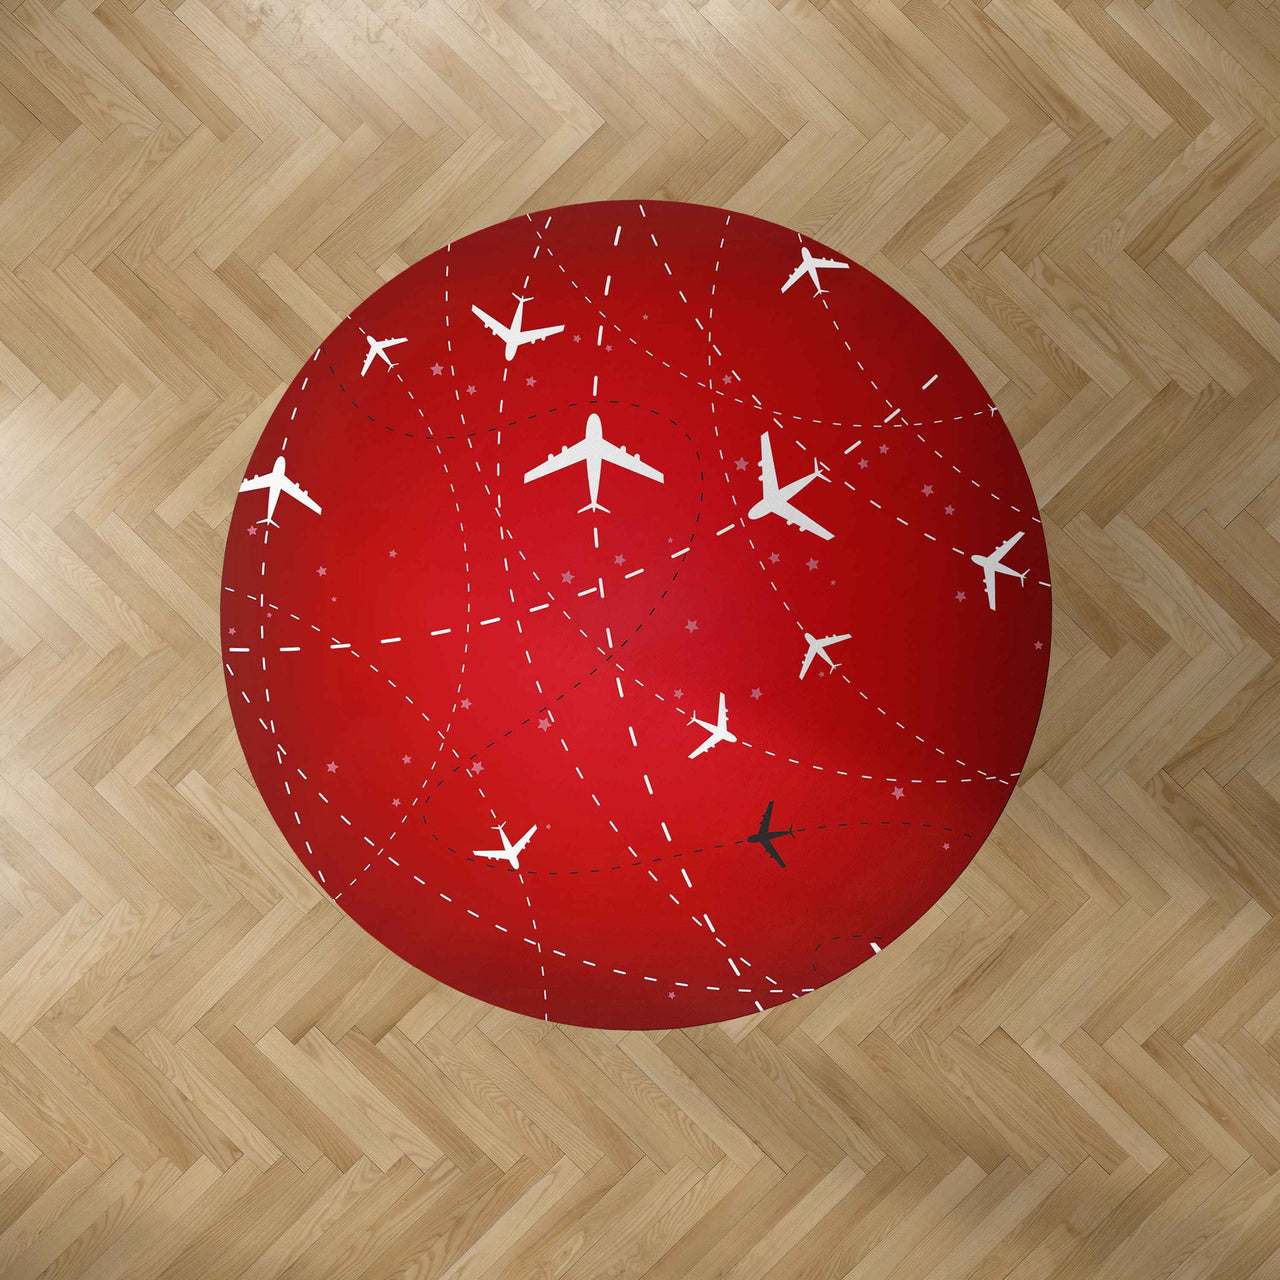 Travelling with Aircraft (Red) Designed Carpet & Floor Mats (Round)